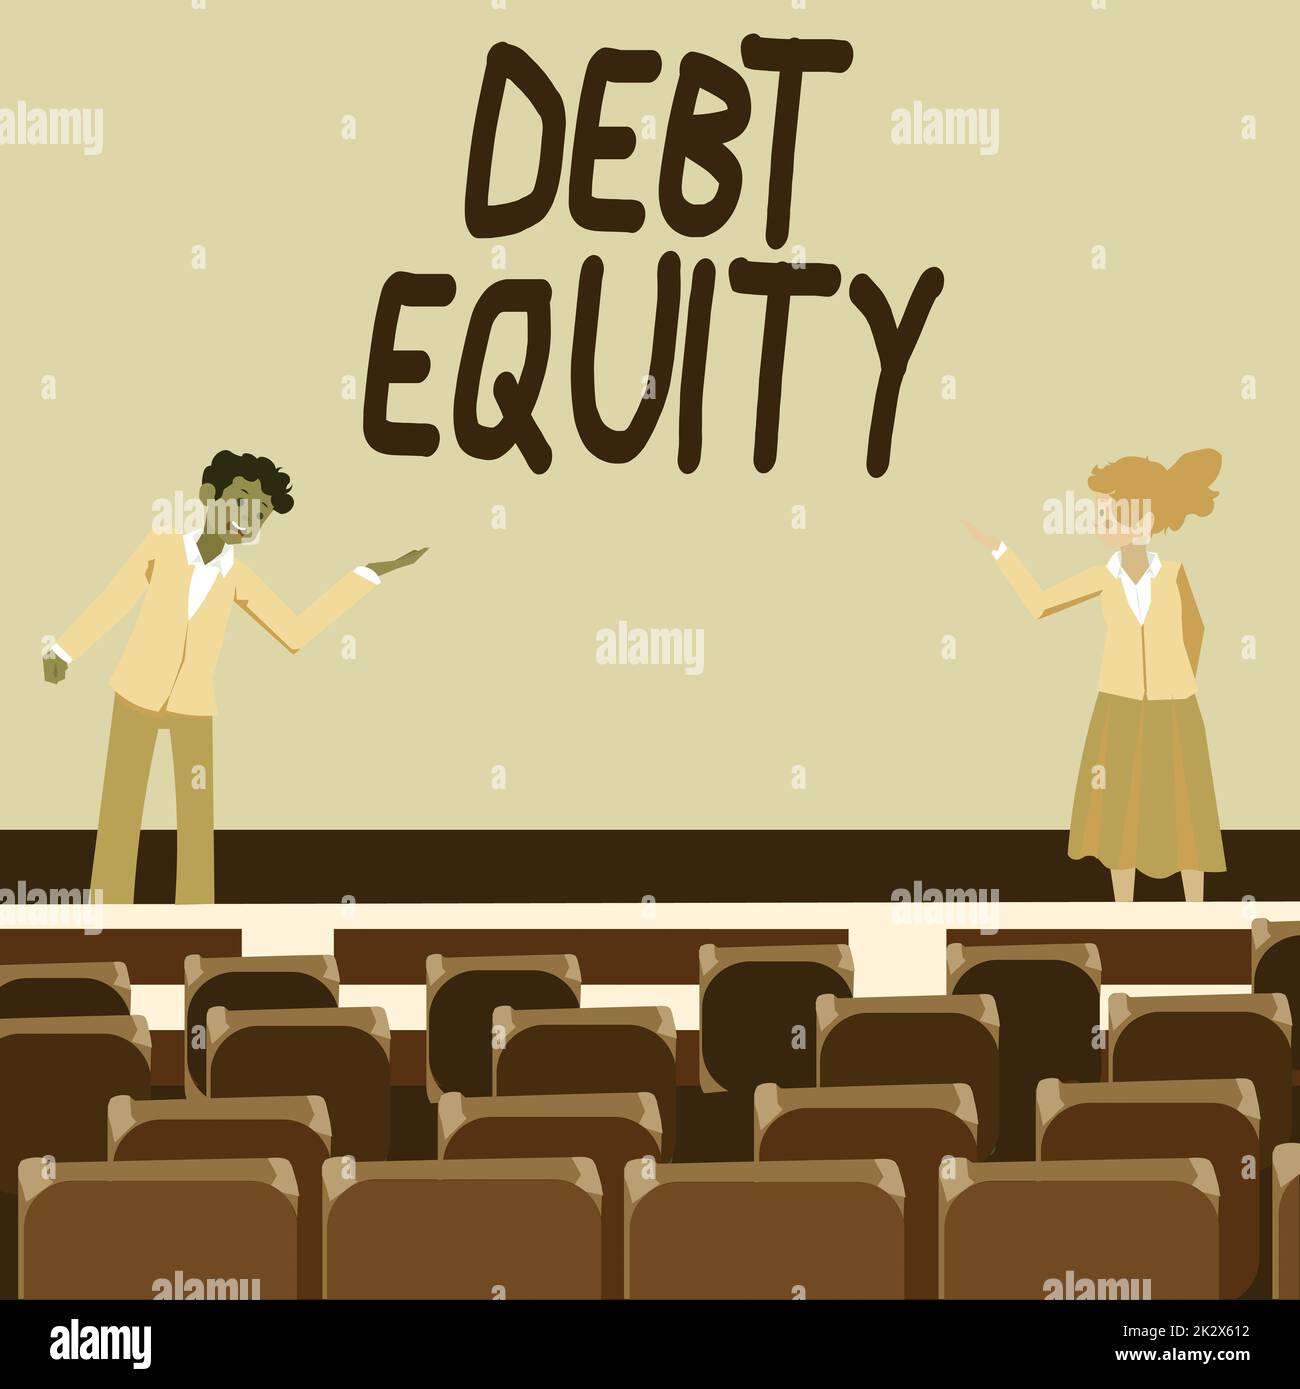 Text showing inspiration Debt Equity. Business approach dividing companys total liabilities by its stockholders Male and female colleagues doing presentation on stage with hand gestures. Stock Photo